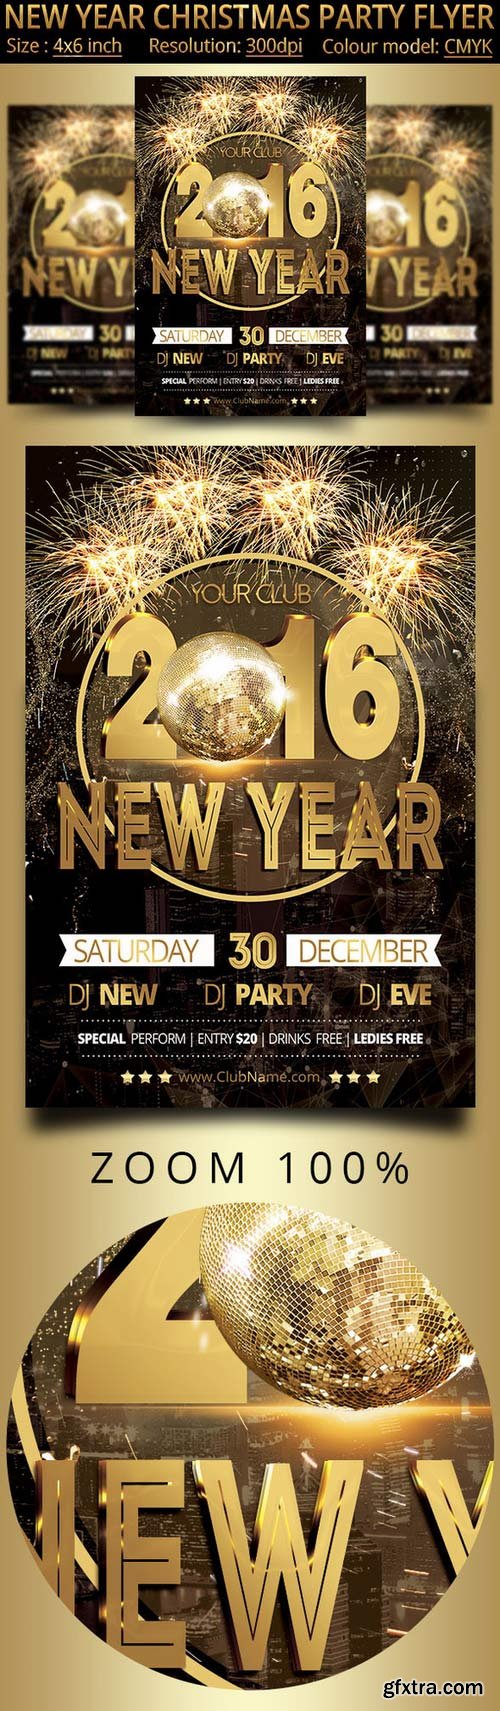 CM - New Year Christmas Party Flyer 459340